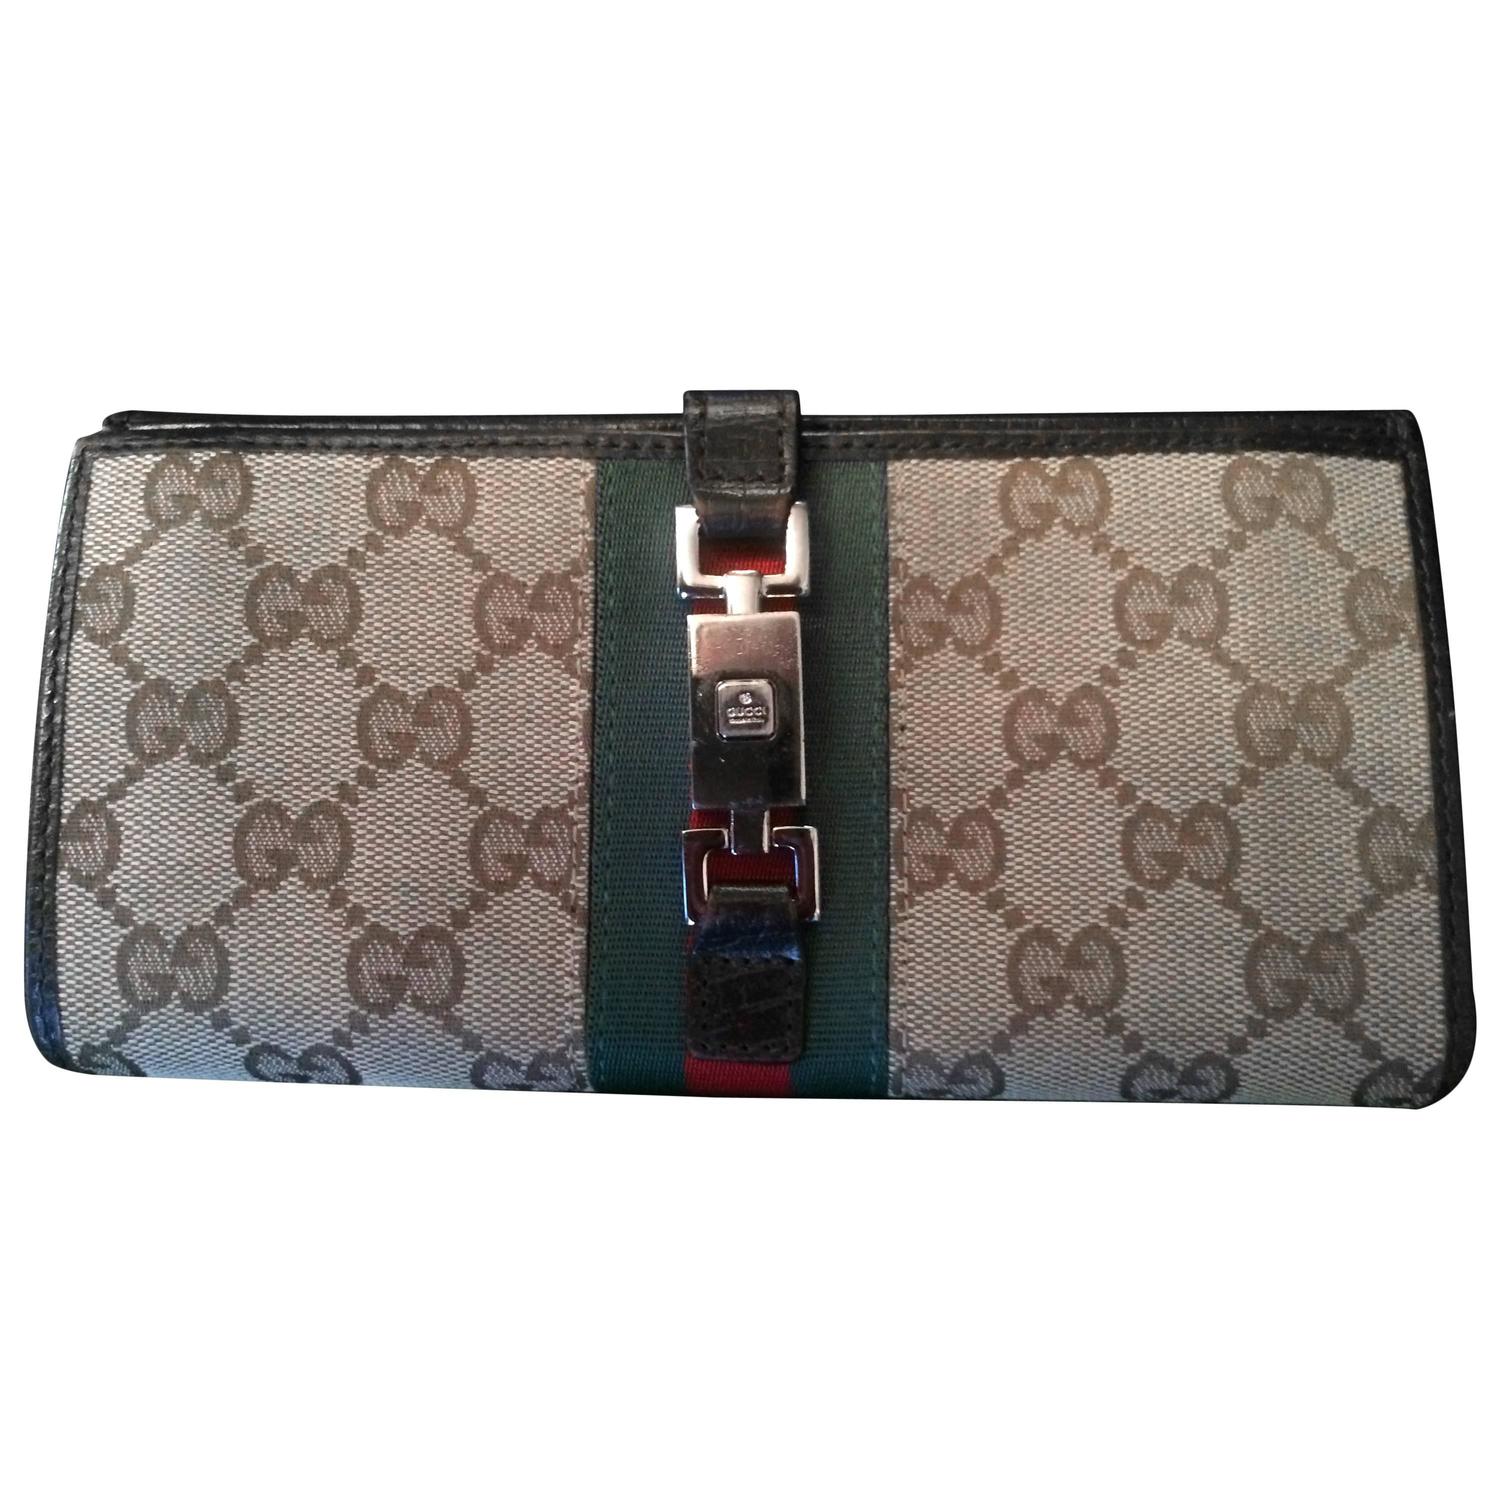 Vintage Gucci Wallet with clasp For Sale at 1stdibs